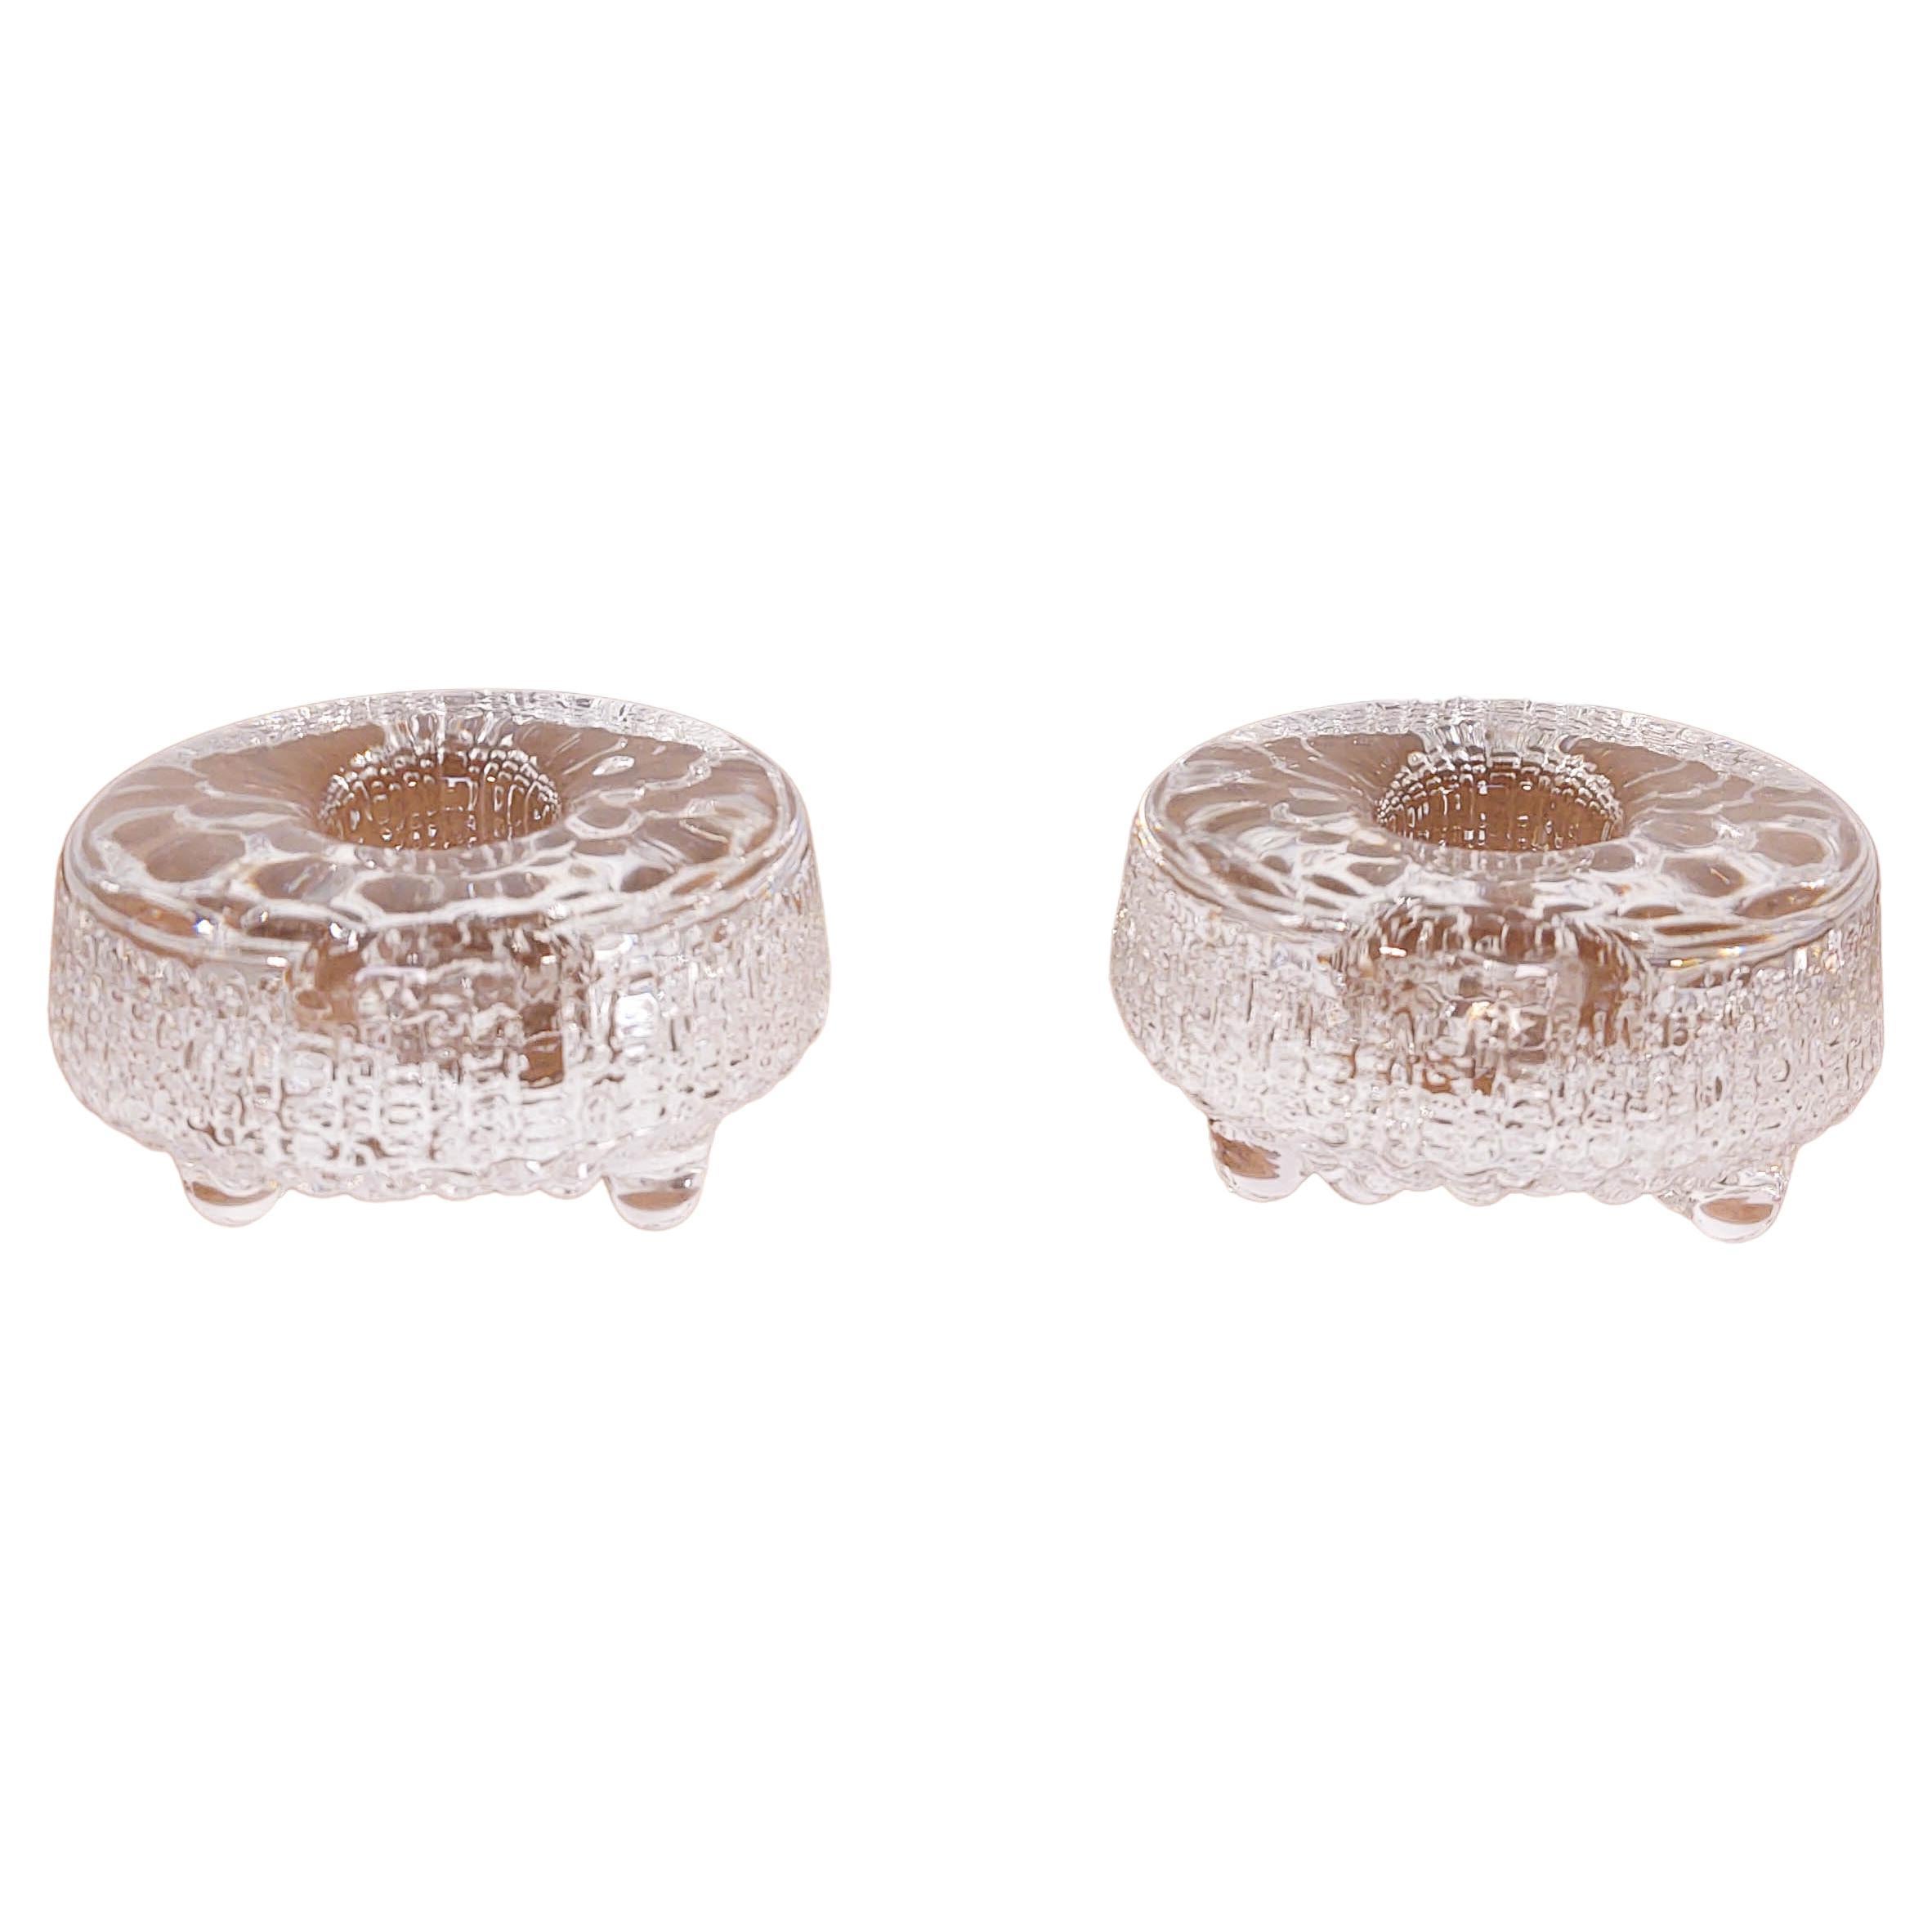 Pair of Ultima Thule Candle Holders by Tapio Wirkkala for Iittala, Finland